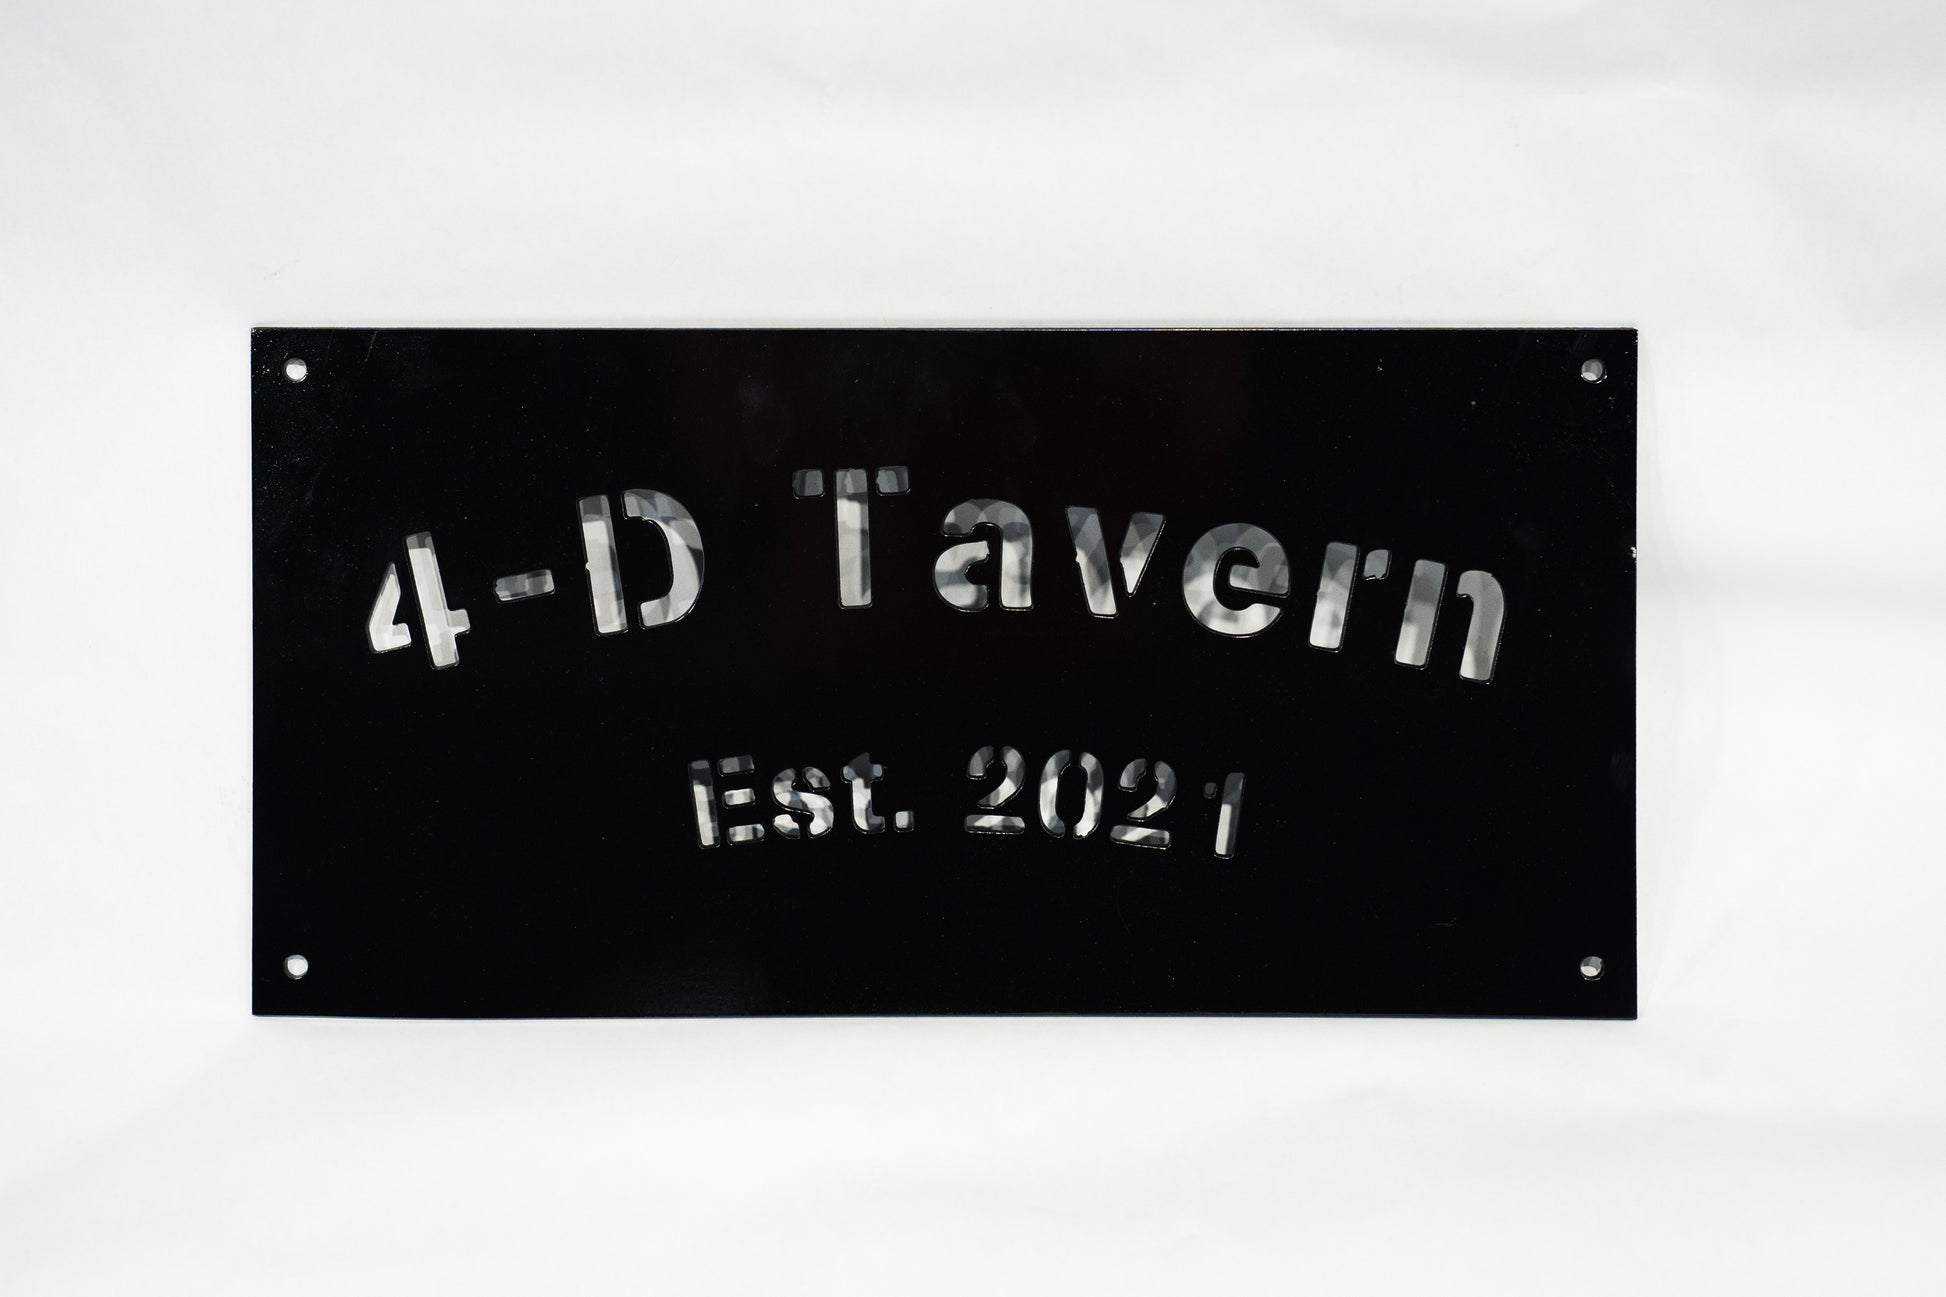 Custom metal sign for a man cave that they call the 4-D Tavern